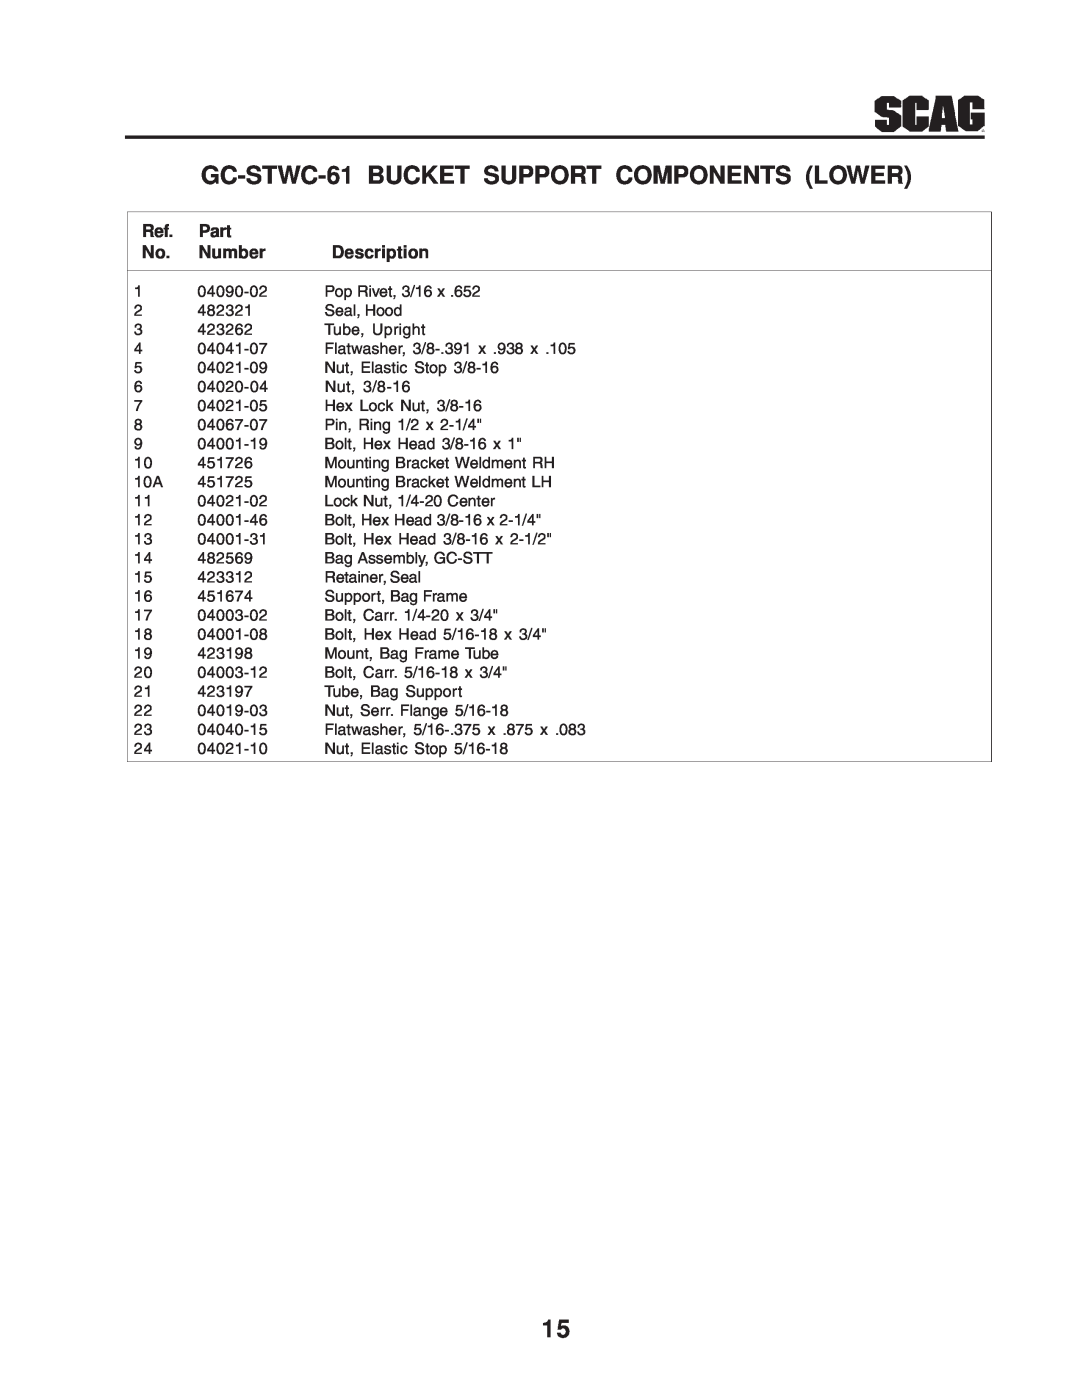 Scag Power Equipment GC-STWC-61V GC-STWC-61 BUCKET SUPPORT COMPONENTS LOWER, Part, Number, Description 